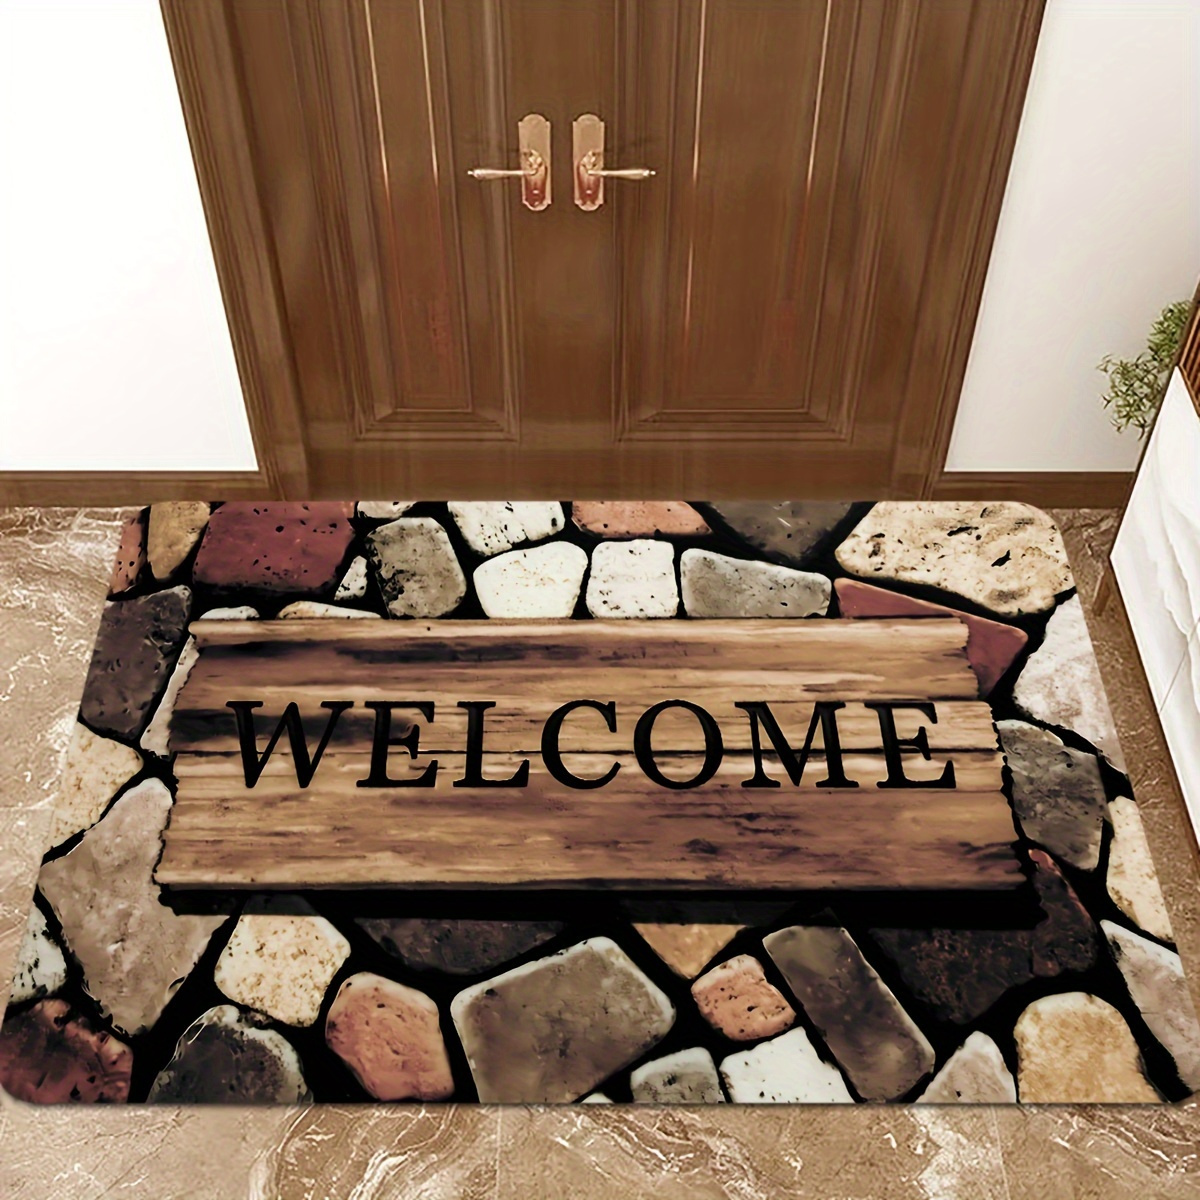 

1pc Welcome Doormat, Modern Stone Splicing Print Carpet, Anti Slip Polyester Floor Mat, Suitable For Kitchen, Living Room, Entrance Balcony, Home Decoration